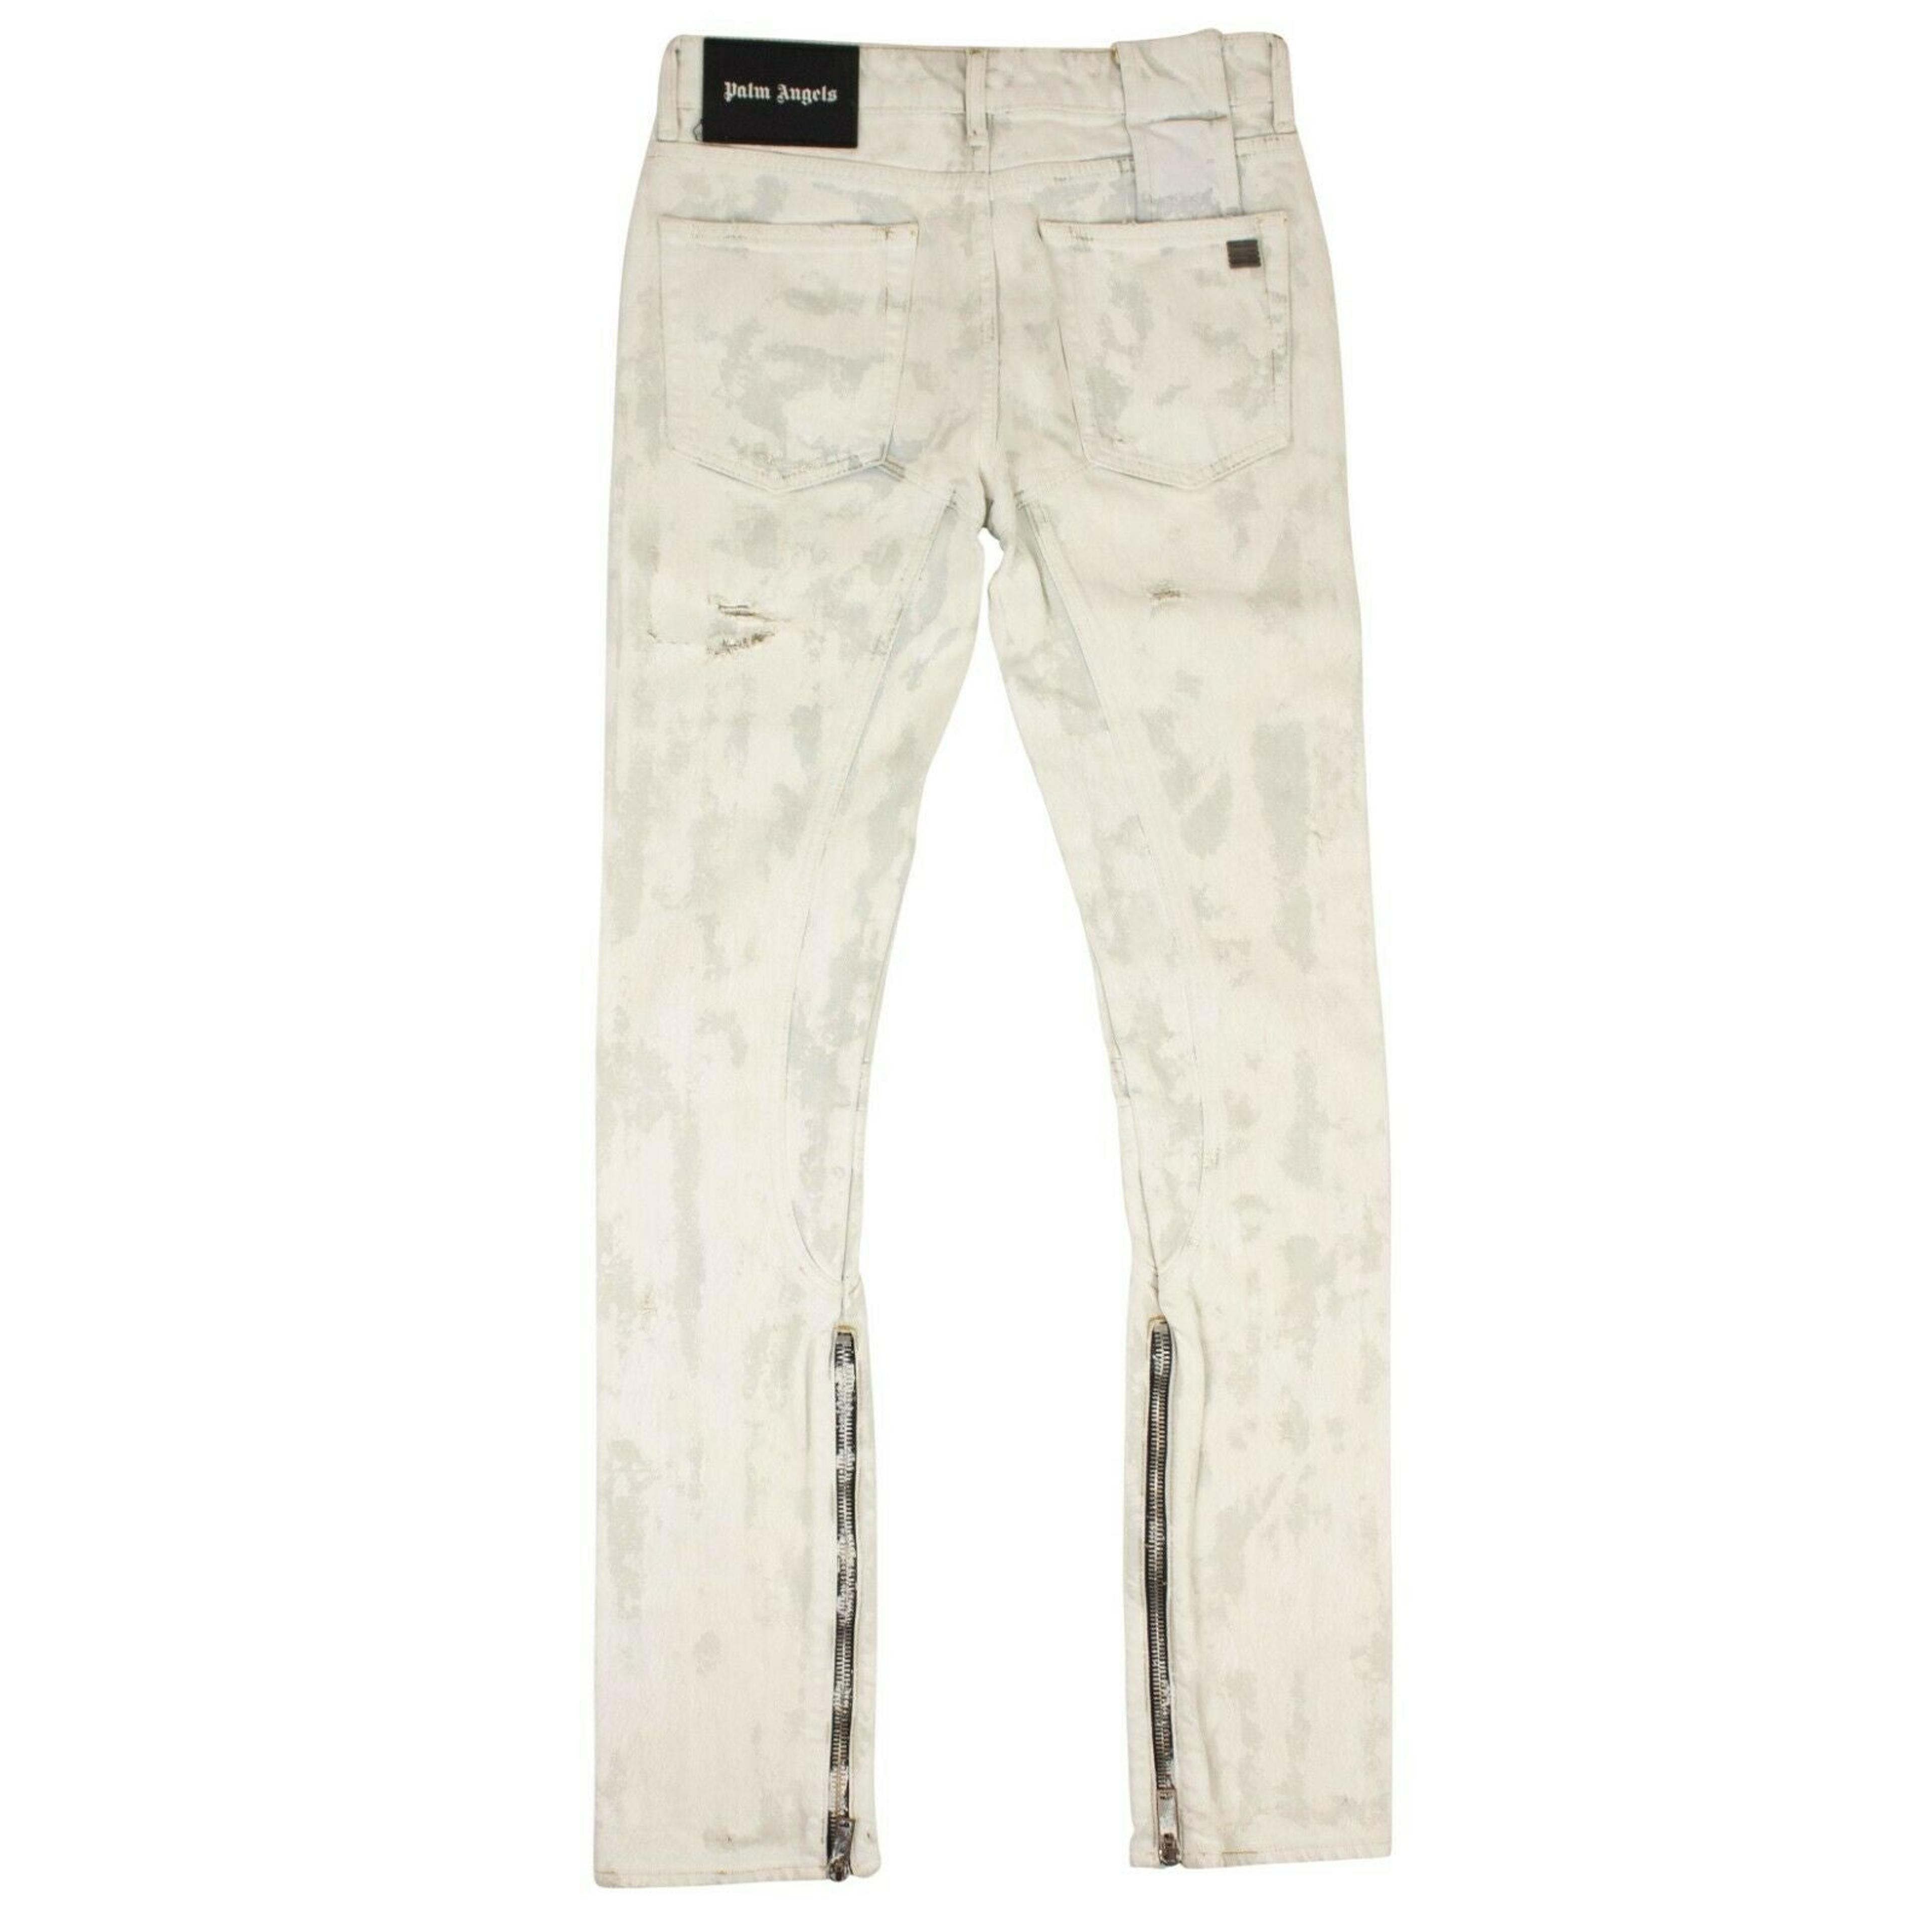 Alternate View 1 of Women's Blue And White Tie Dye Distressed Jeans